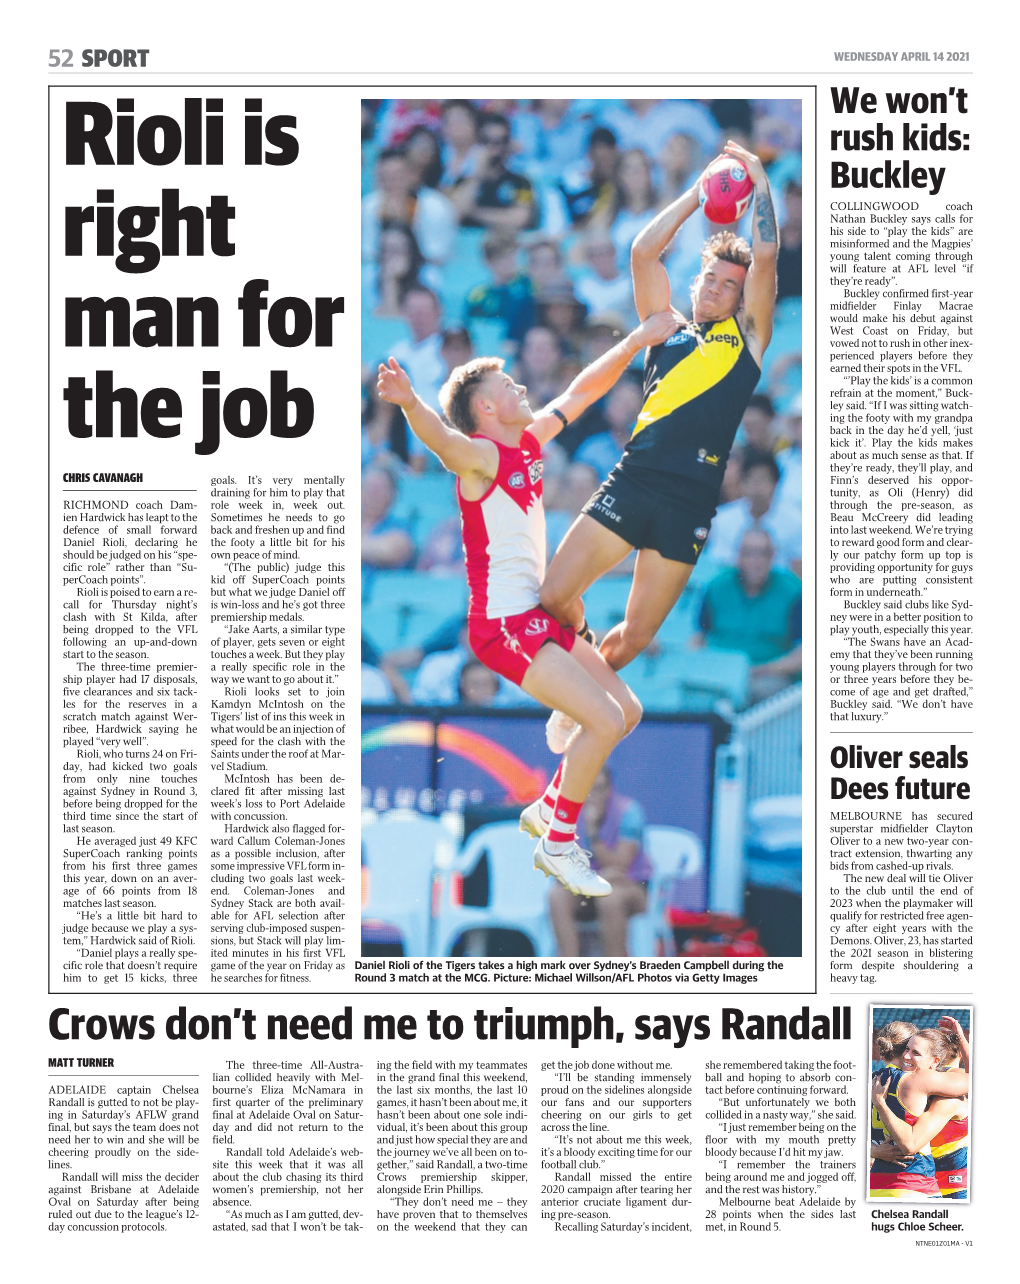 Crows Don't Need Me to Triumph, Says Randall